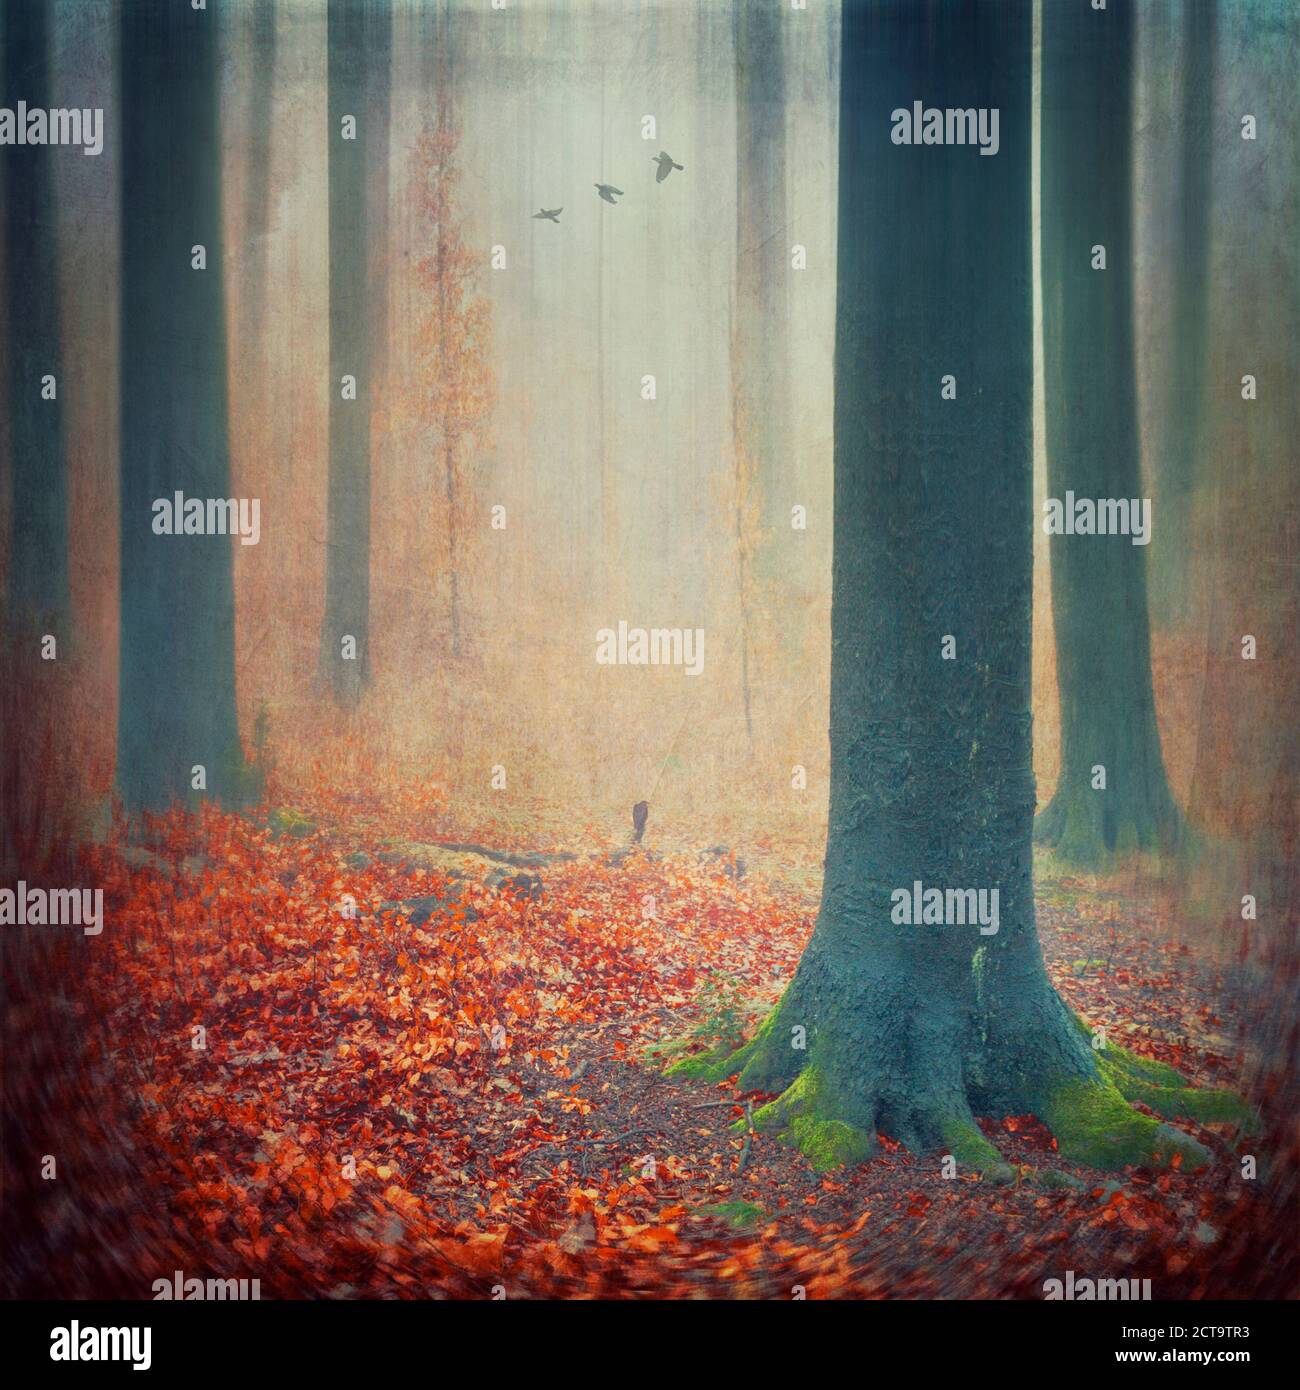 Autumn forest with red foliage covering the ground, digital alteration Stock Photo